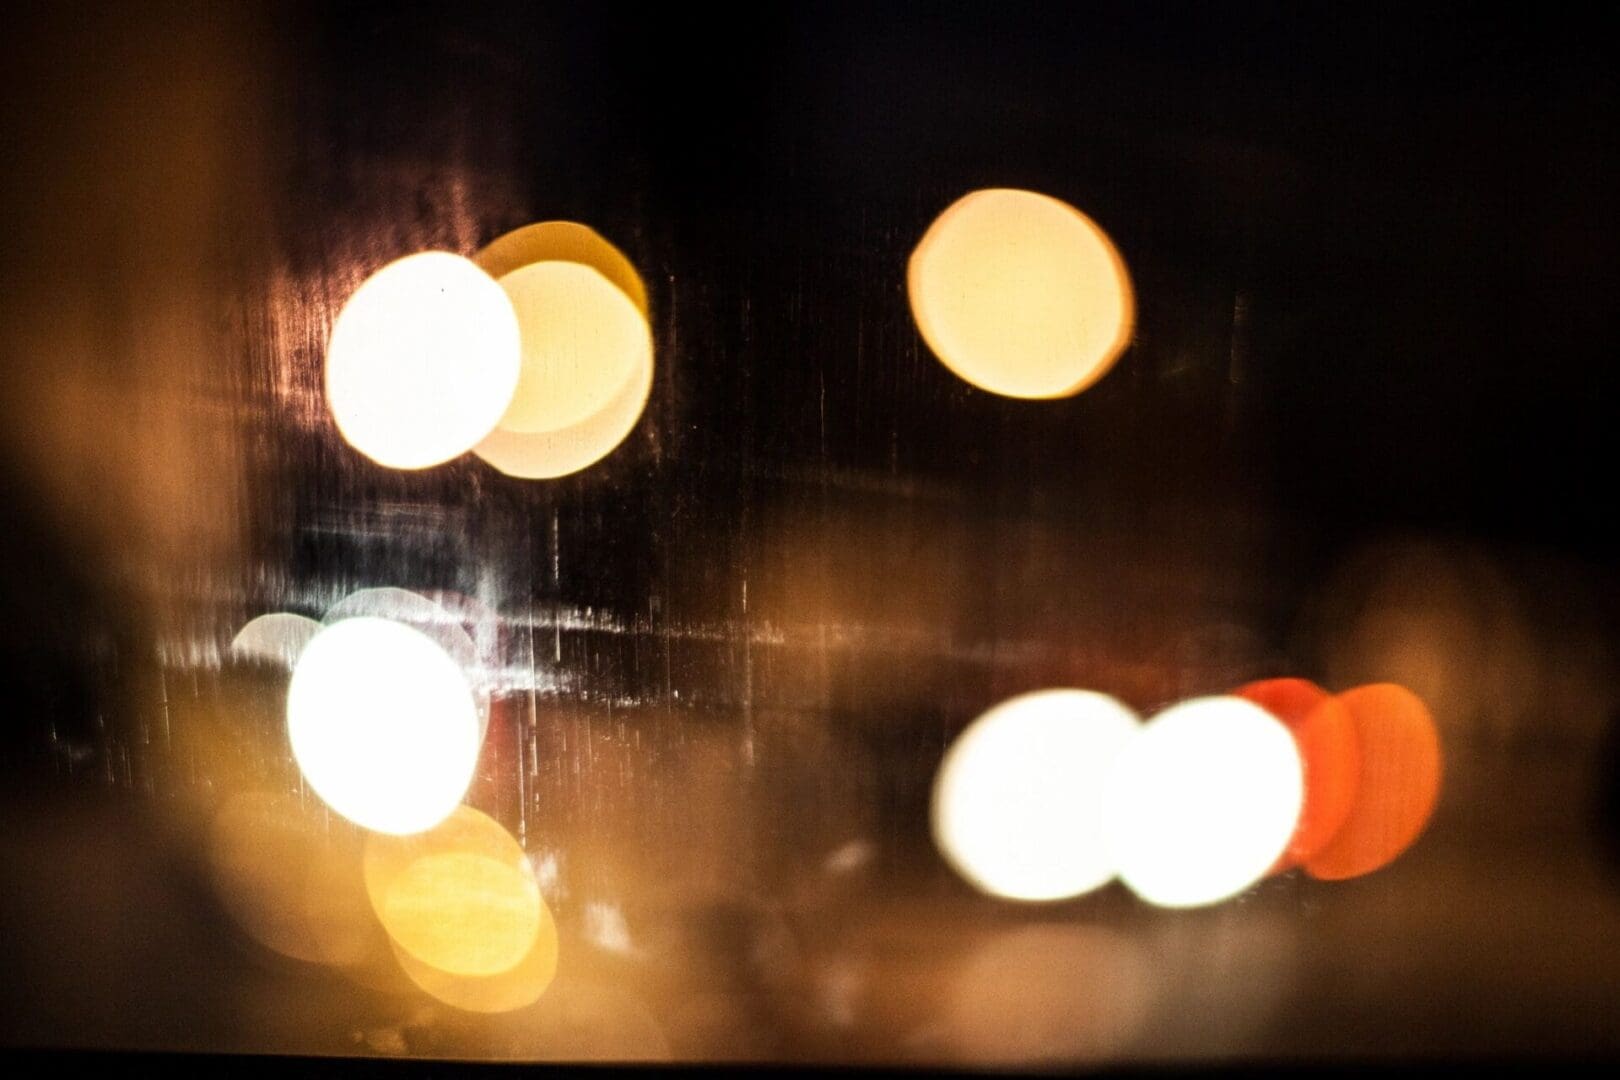 Out-of-focus street lights at night, creating a bokeh effect.